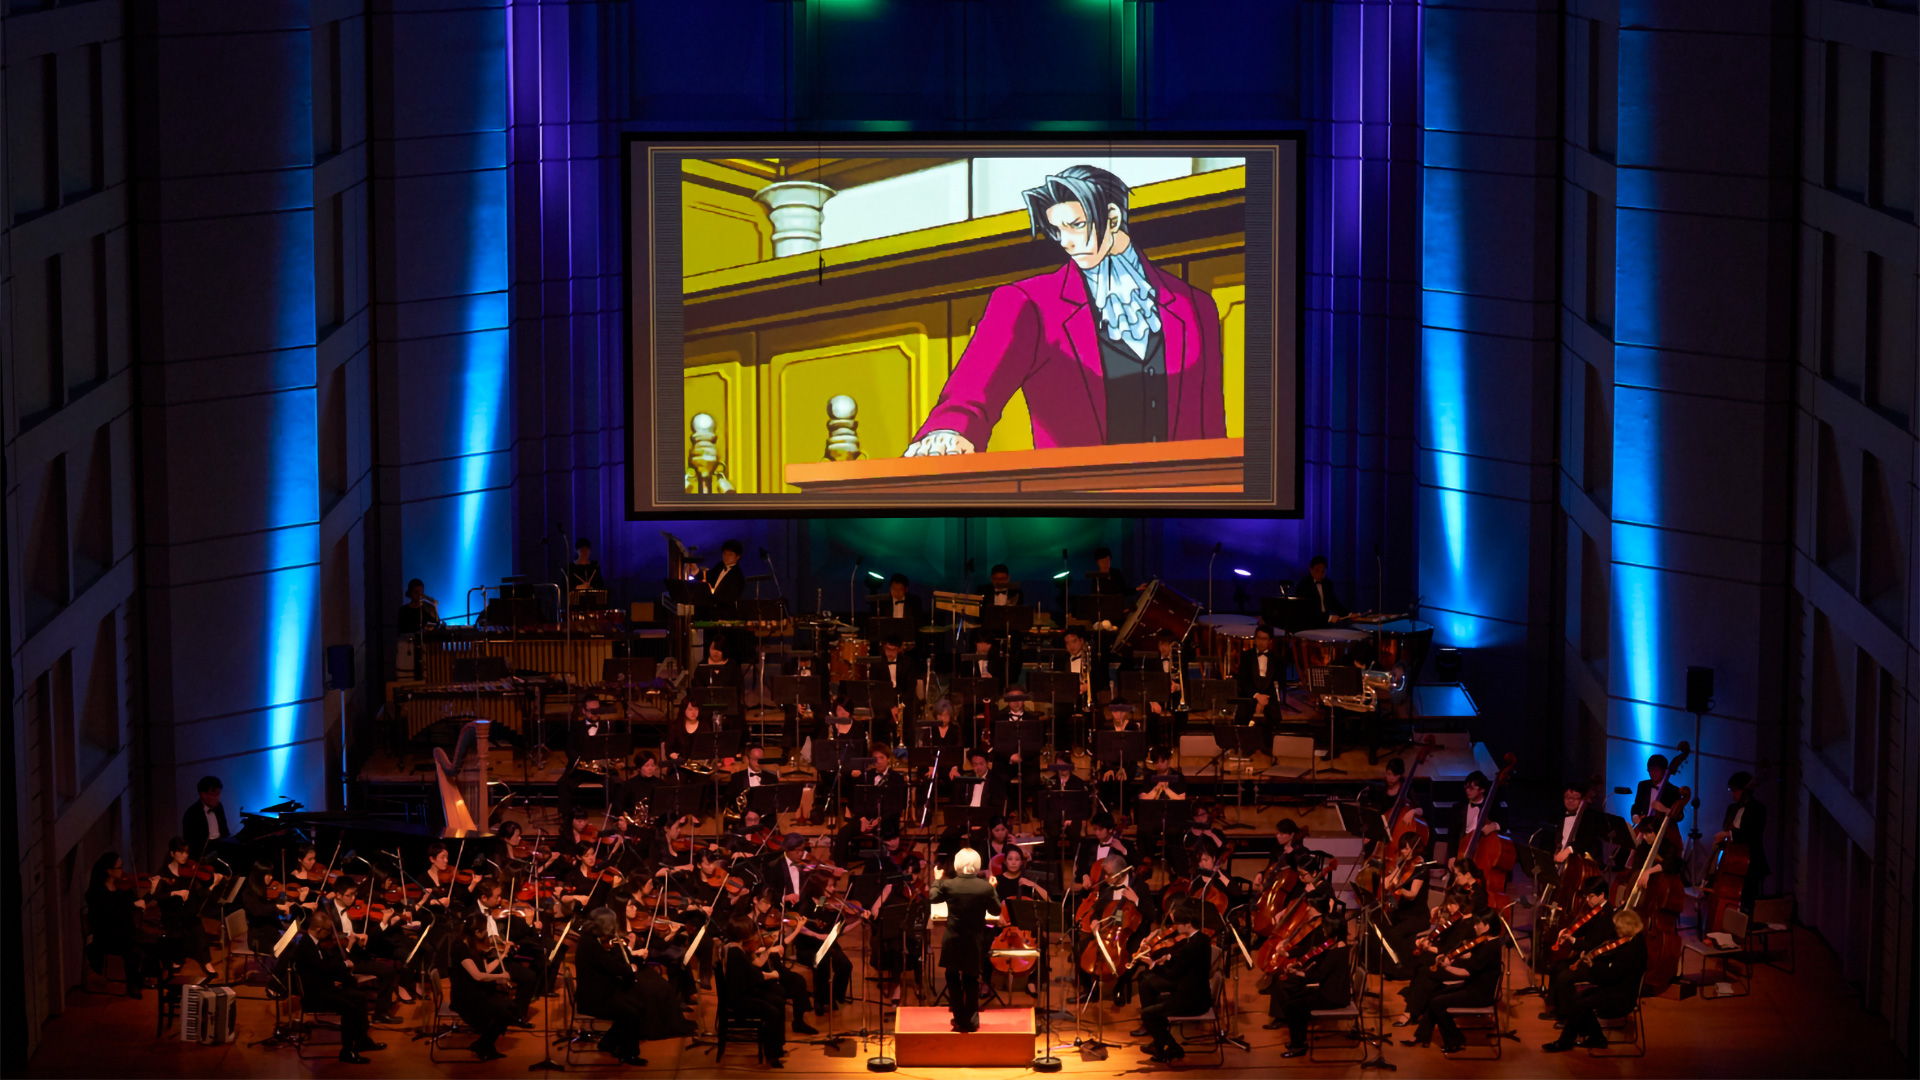 An Ace Attorney orchestral concert is streaming live online next